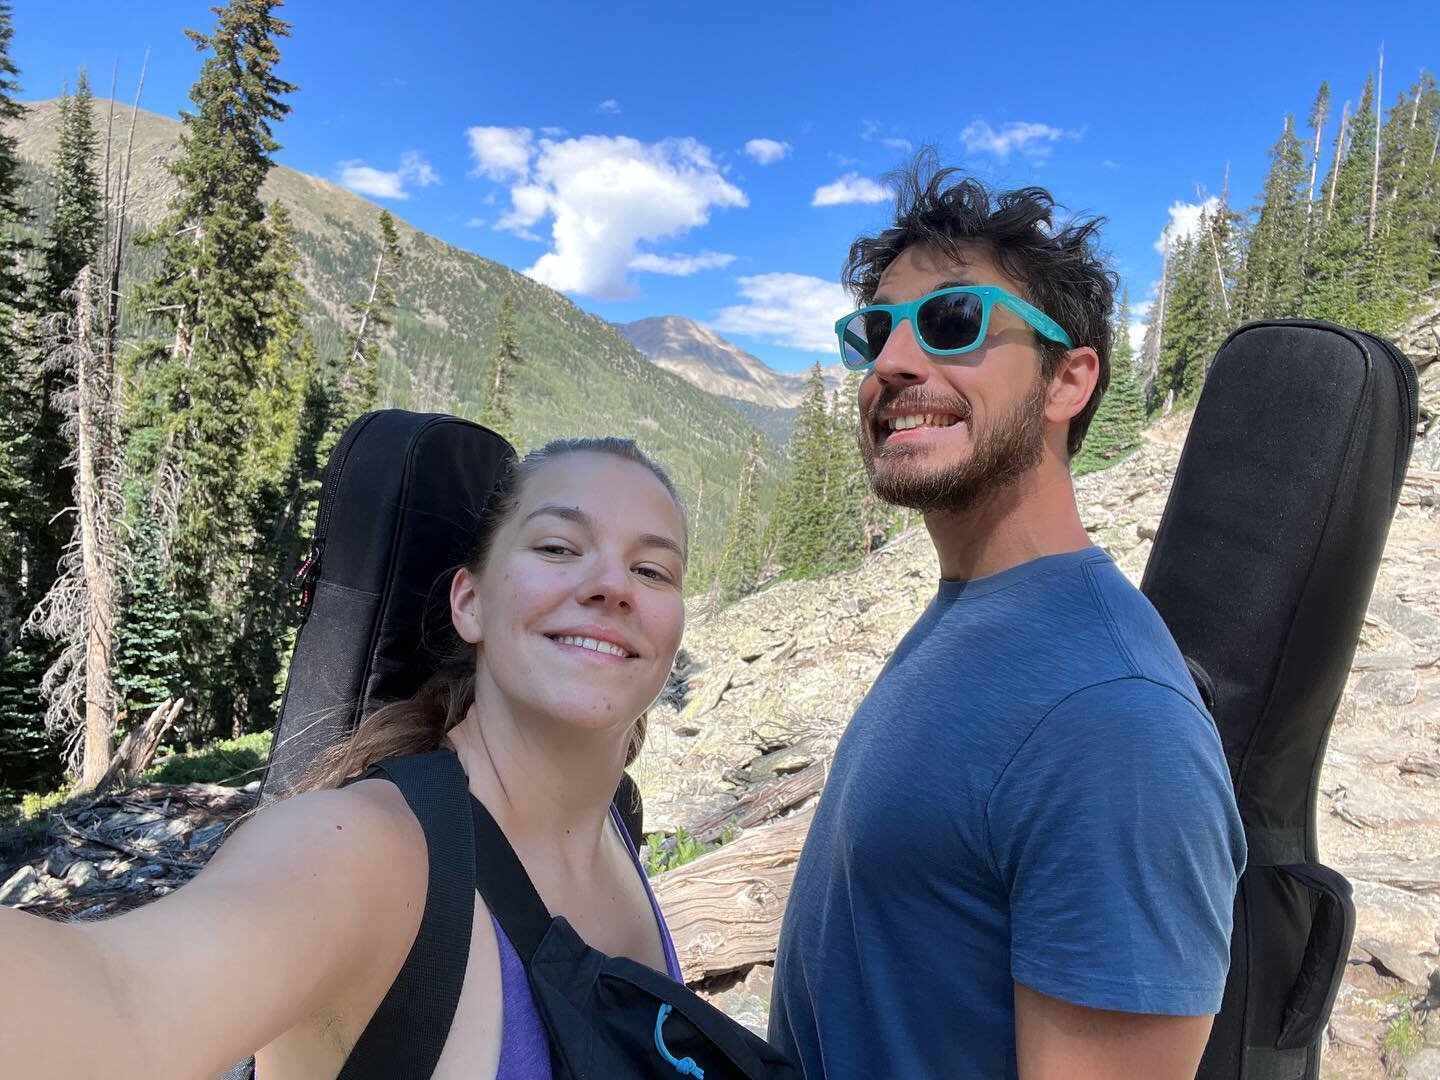 We&rsquo;ve been trompin&rsquo;. More tromp to come. 

#trompin #hiking #colorado #ptarmiganlake #tourlife #dayoff